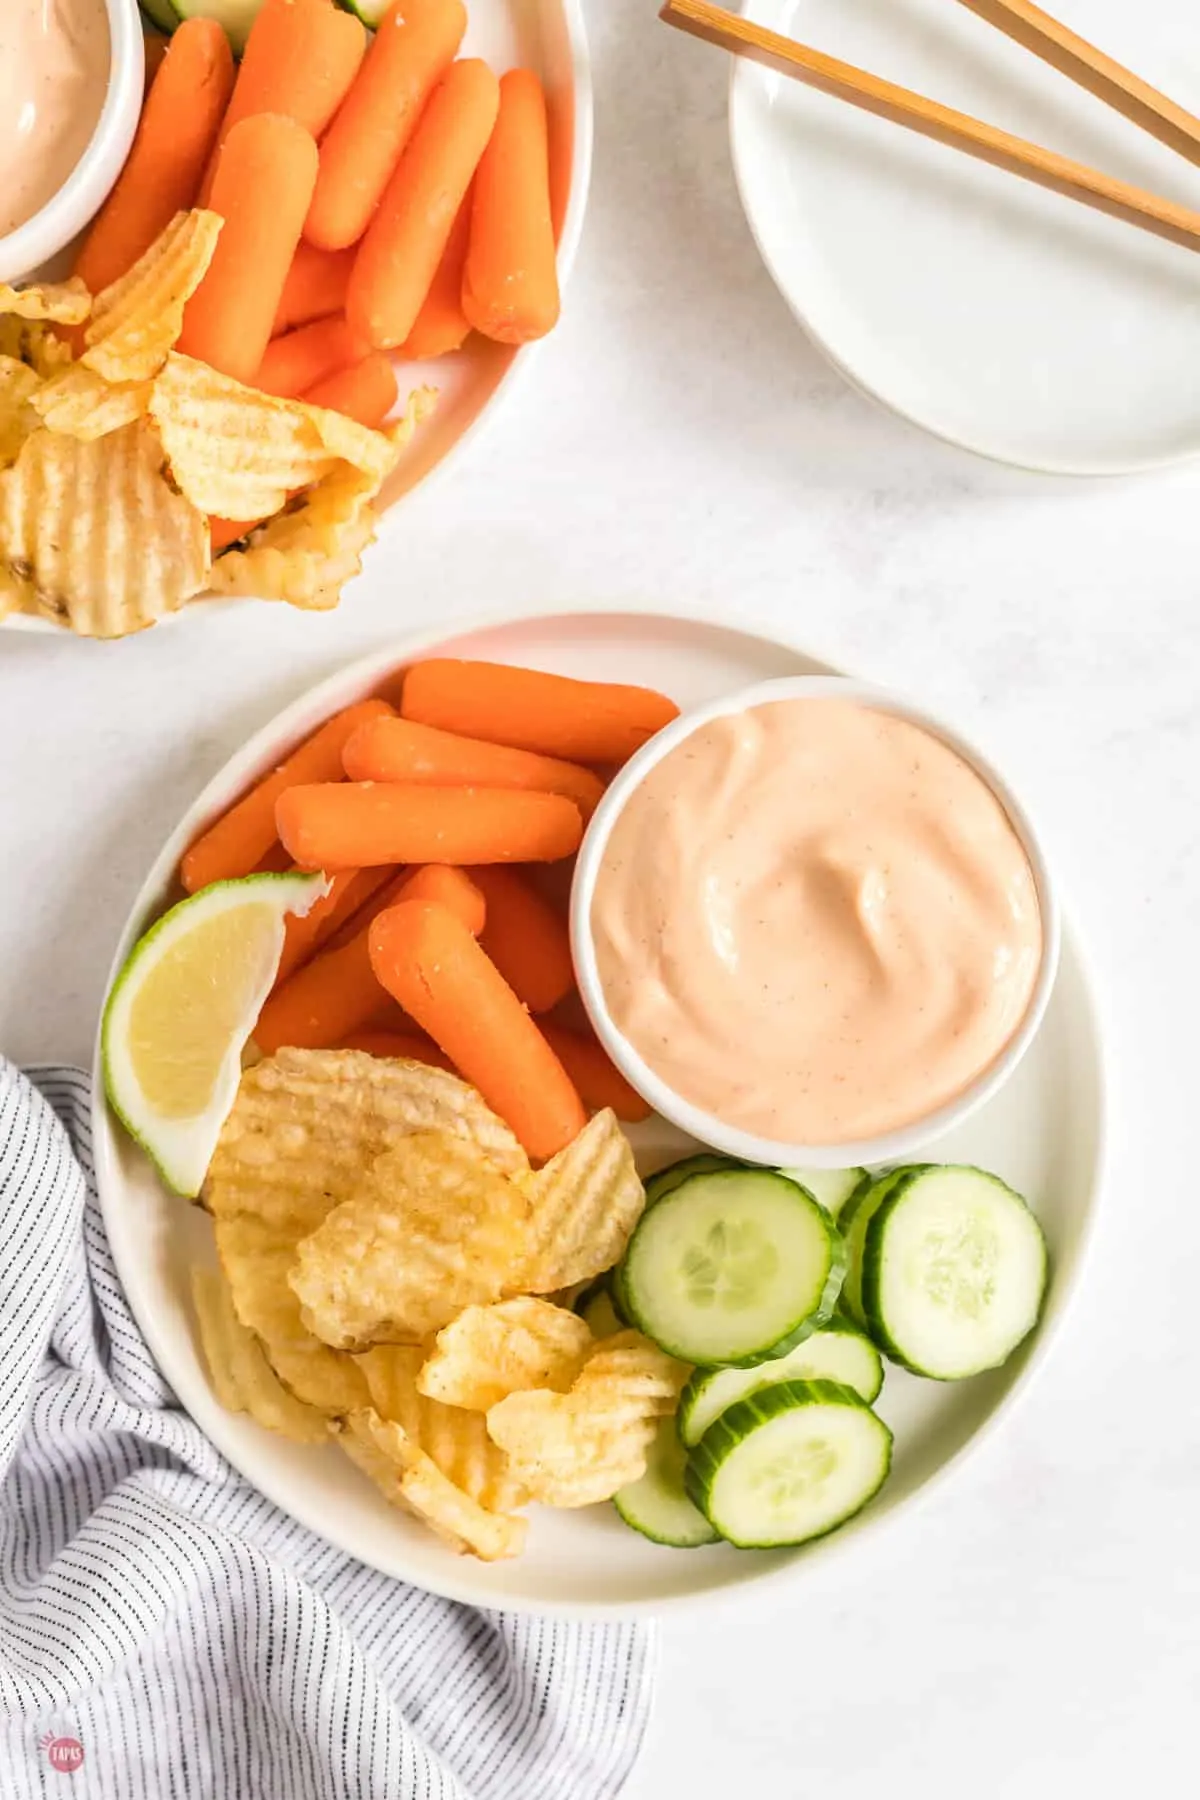 Top view of spicy aioli sauce in a small bowl on a white plate with fresh baby carrots and slices of cucumber and chips next to it.